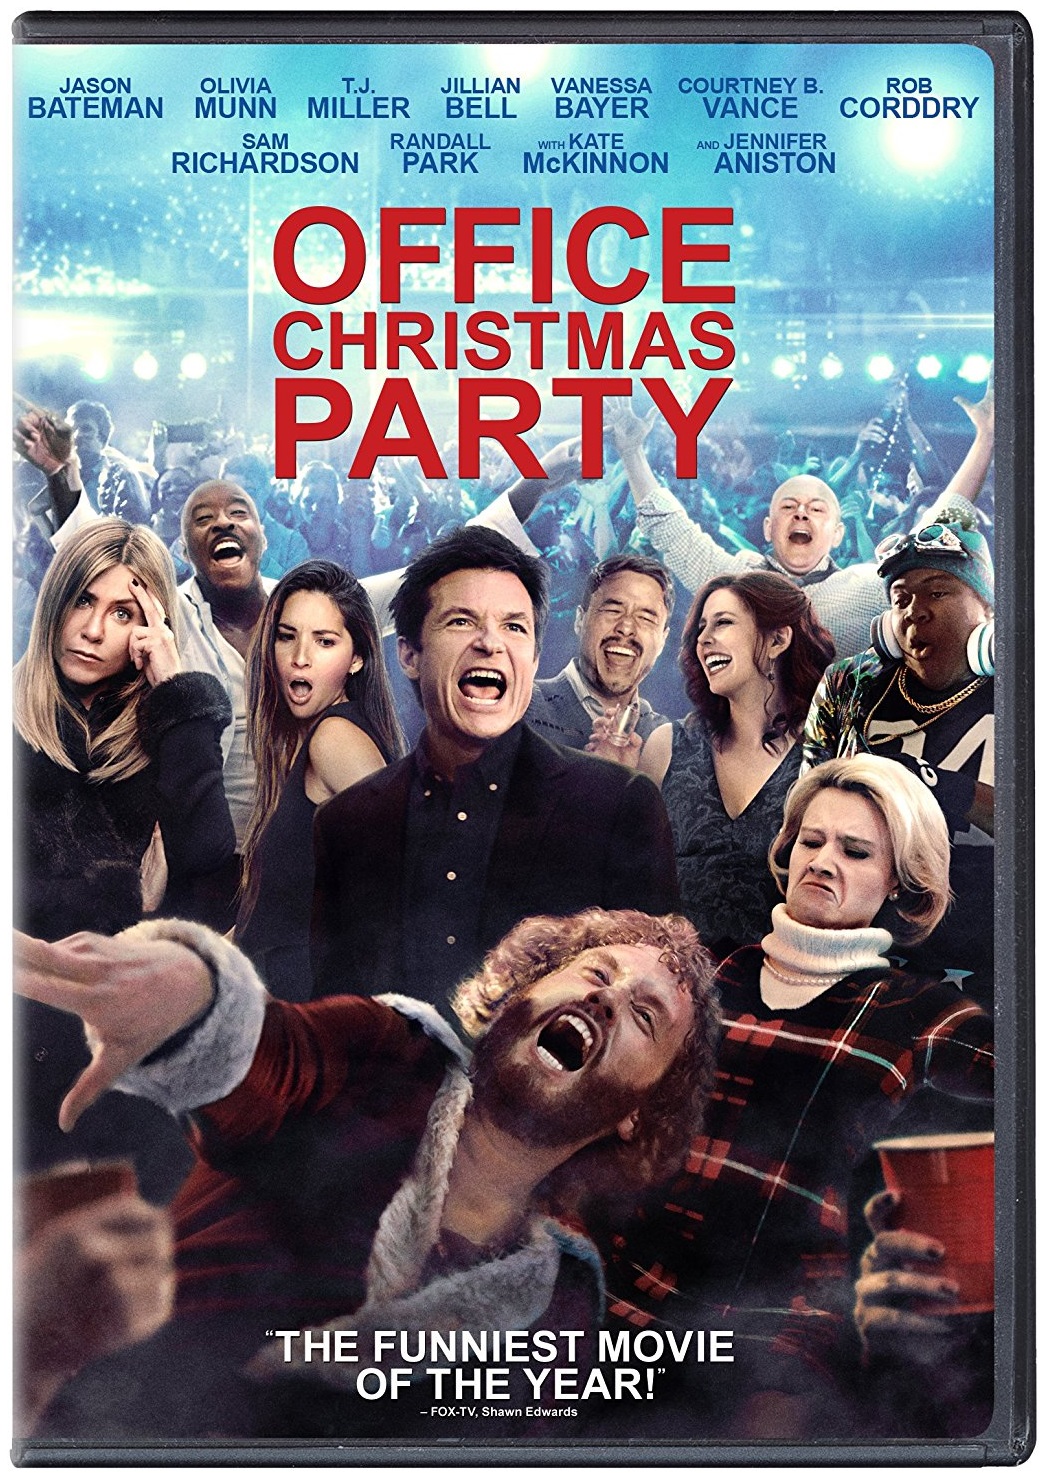 Office Christmas Party: a riotous, tawdry good time - DVD review